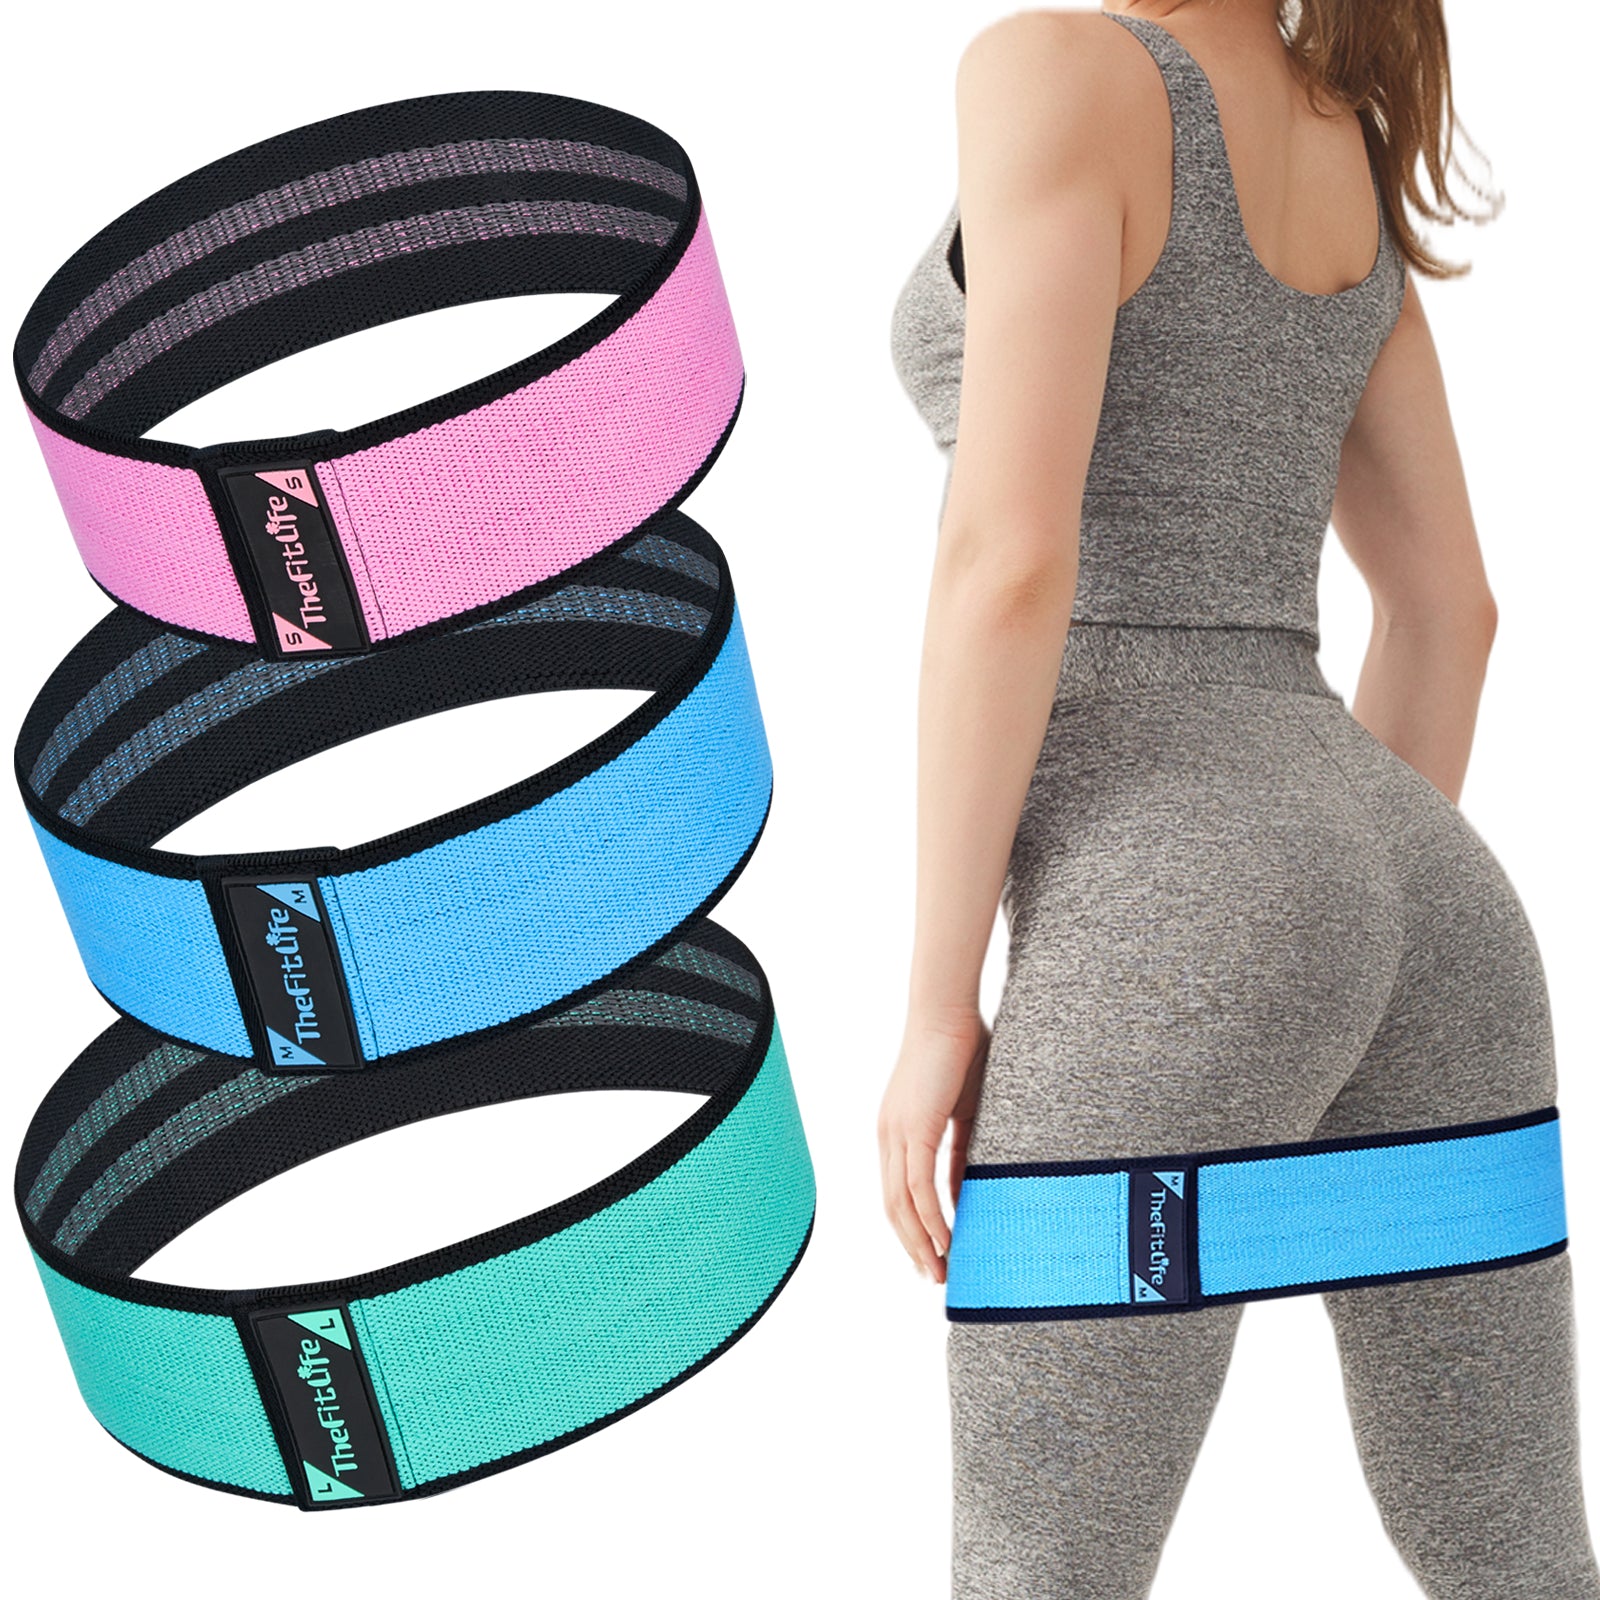 TheFitLife Resistance Bands for Legs and Butt - Cotton Mini Exercise Bands  Circle for Booty, Hip, Glute Workout, Anti-Break, Non-Rolling and Non-Slip